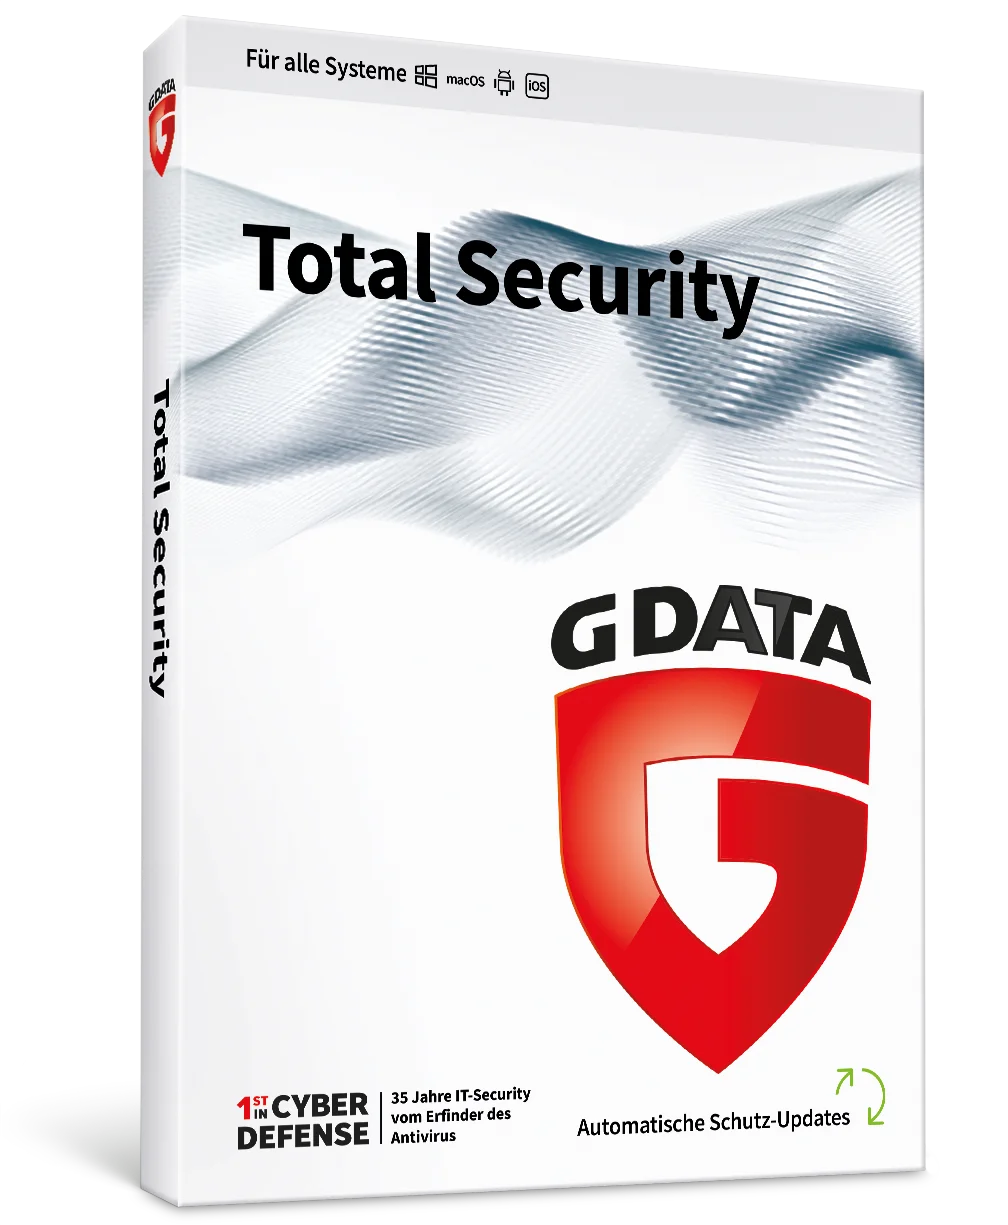 Total security Gdata 1 year 3 devices pc laptop phone